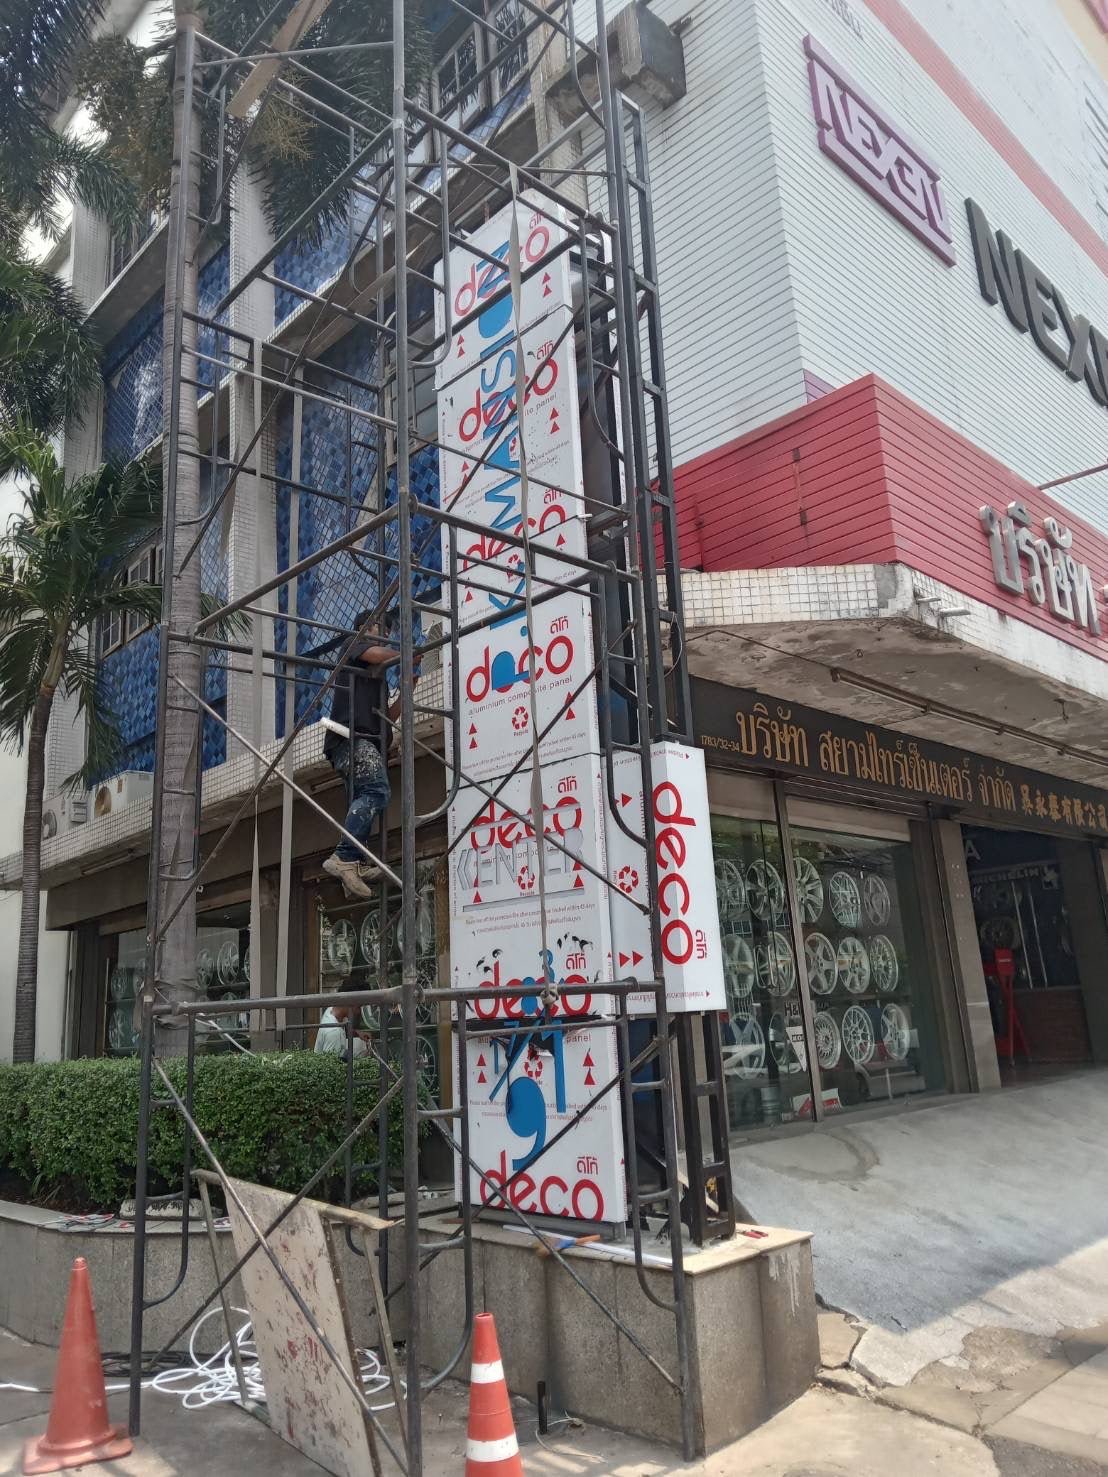 Install signs, set up scaffolding